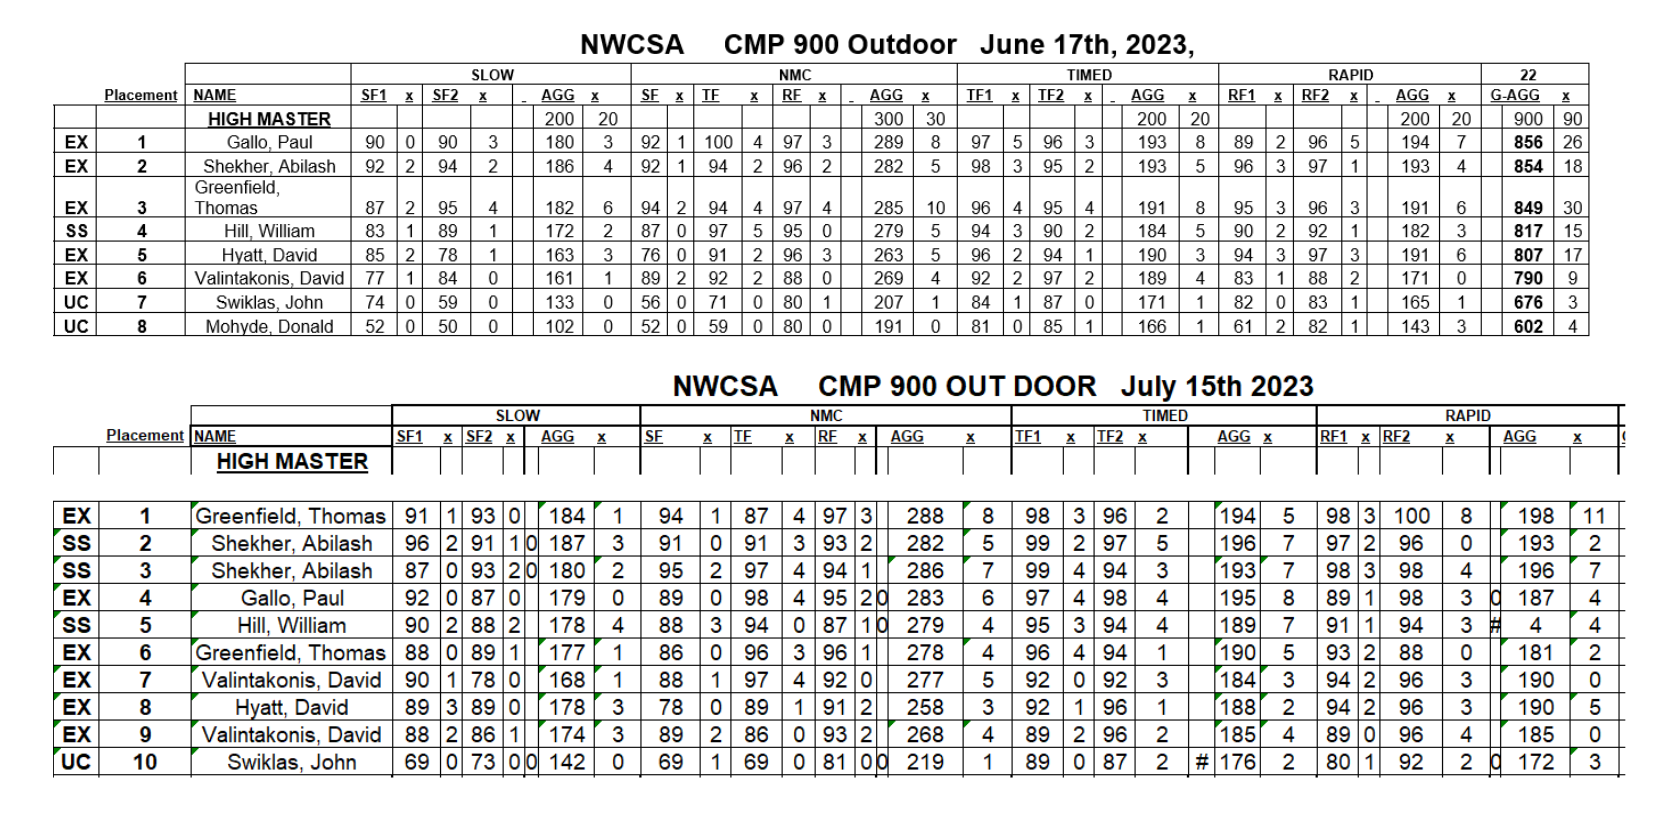 NWCSA CMP 900 Outdoor Match Results June/July 2023